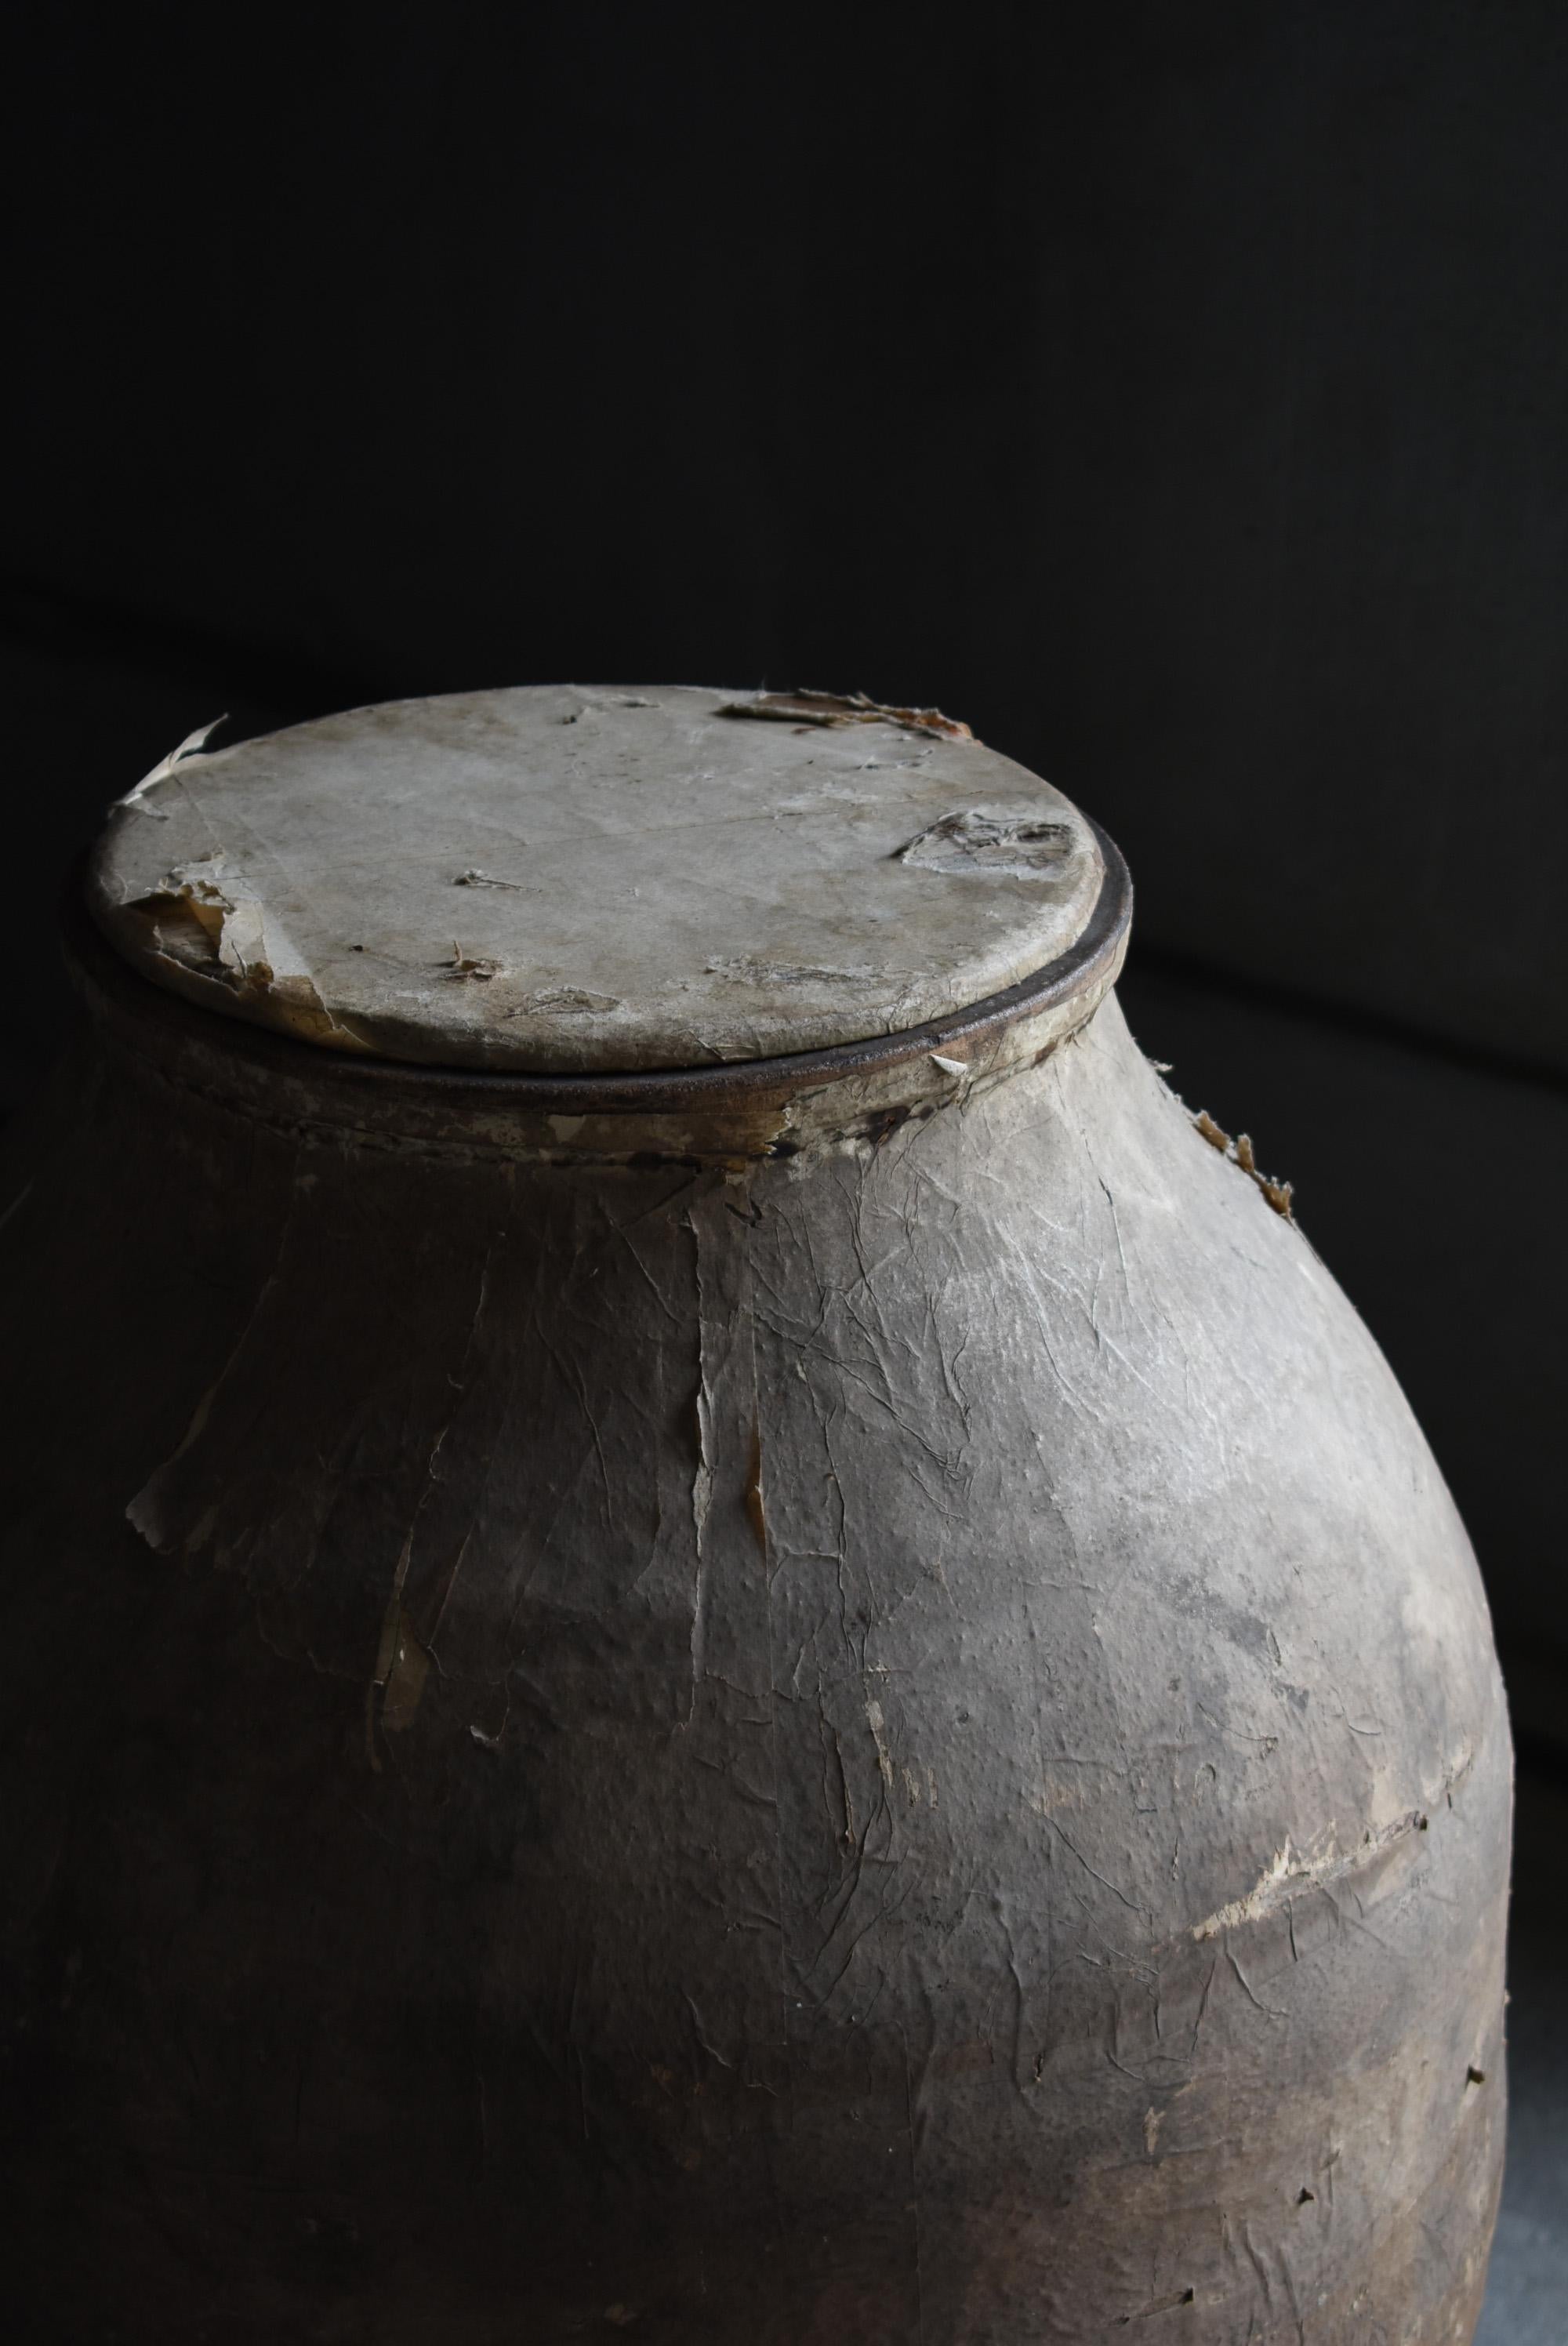 It is a jar baked in Shigaraki (Shiga Prefecture) in Japan.
The era seems to be the Meiji era (1800-1900).
It is used to store tea leaves.
The pottery is covered with paper.
The reason is that it has the effect of preventing cracks and